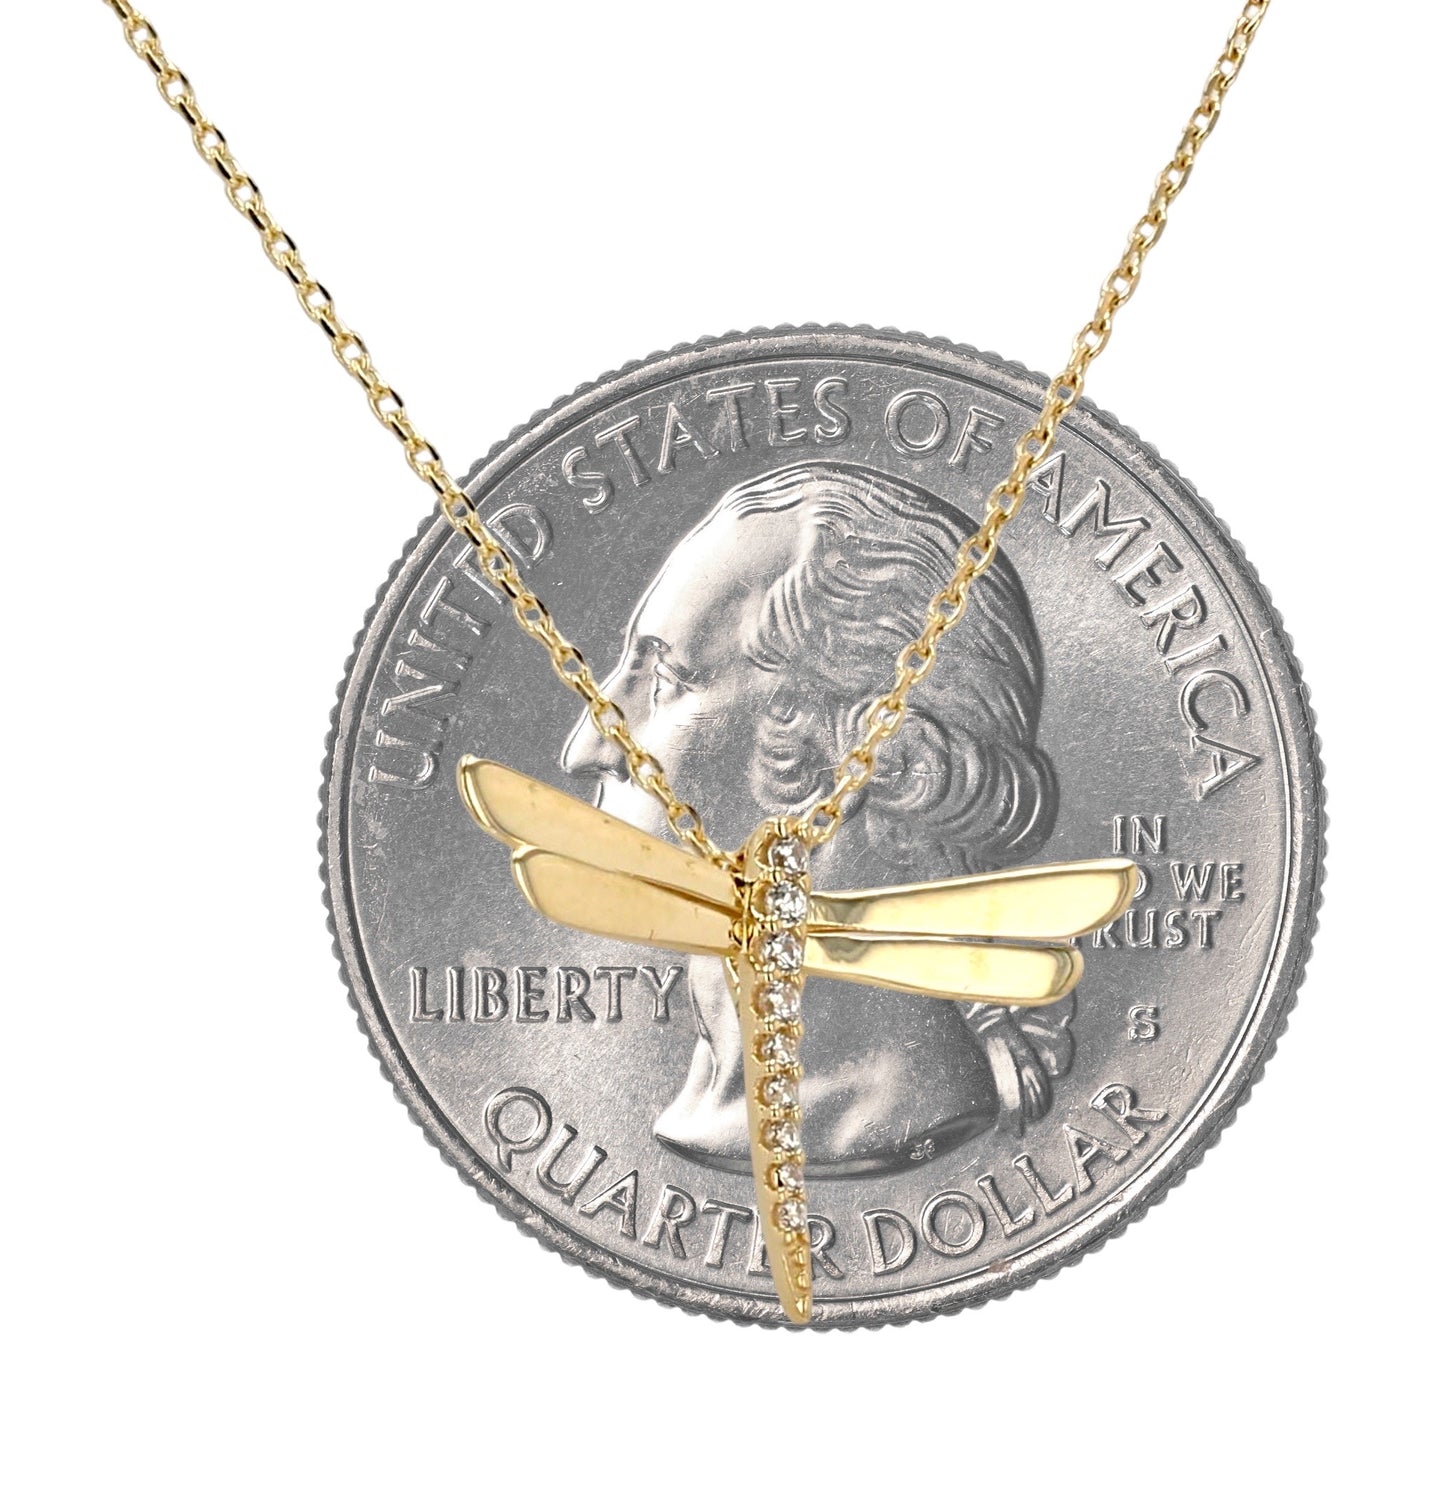 14K Yellow gold dragonfly necklace-226114